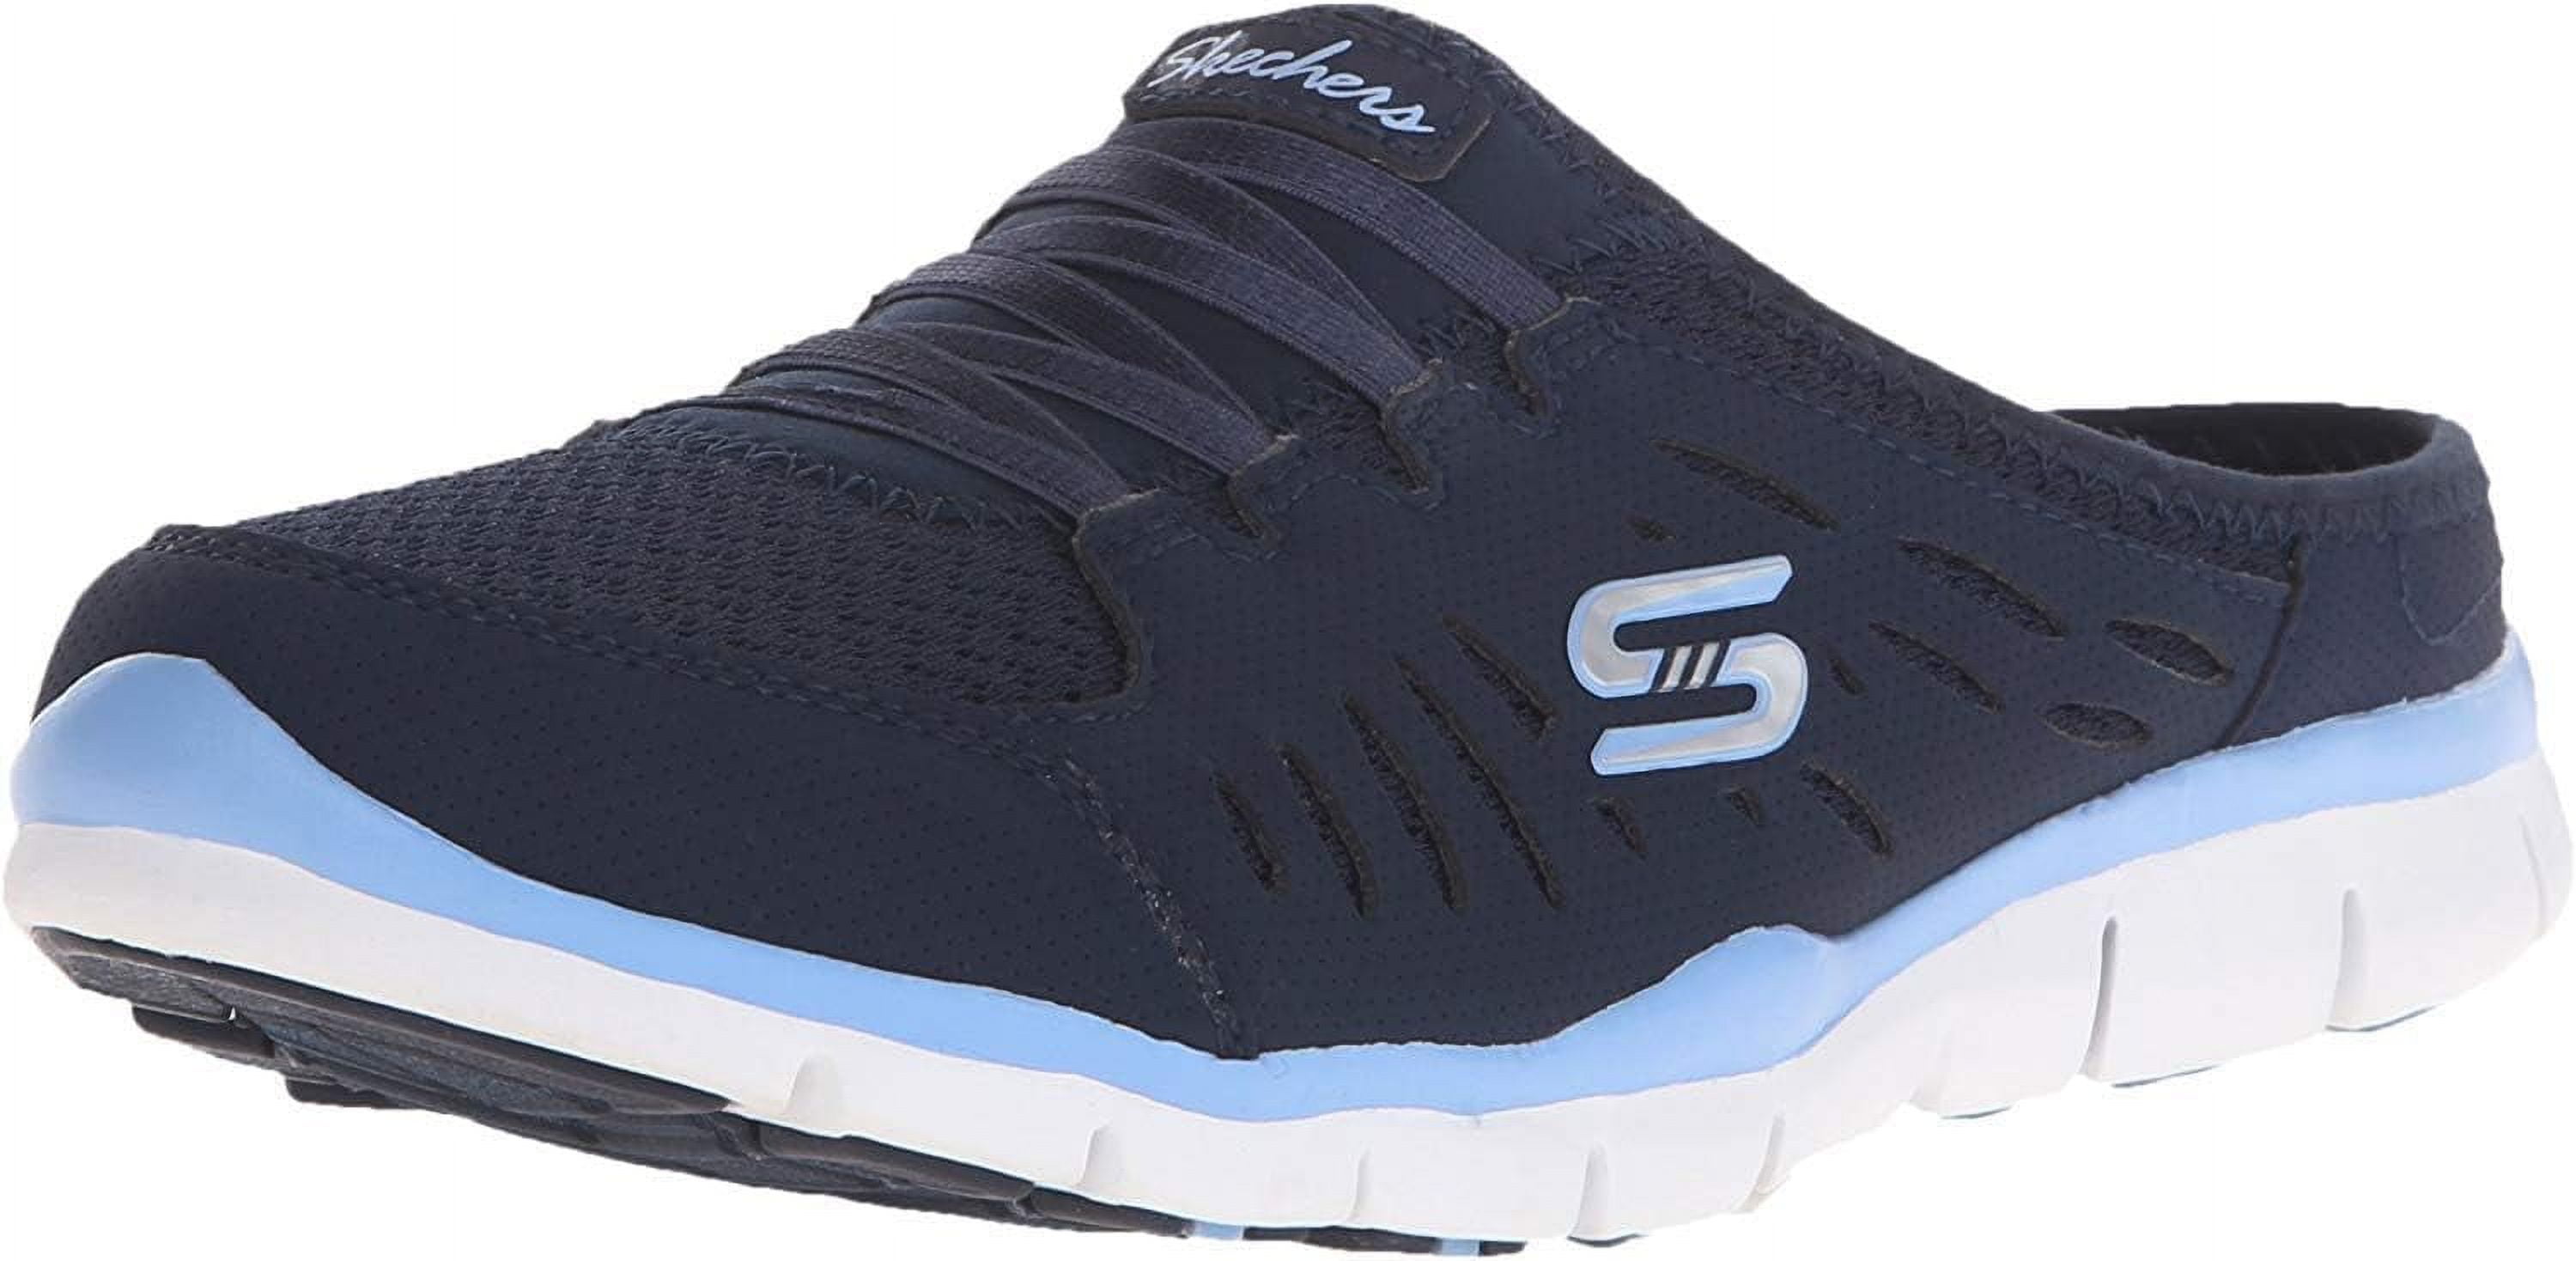 Sport minimalist shoes Nummulit Ignis in Galaxy Blue color